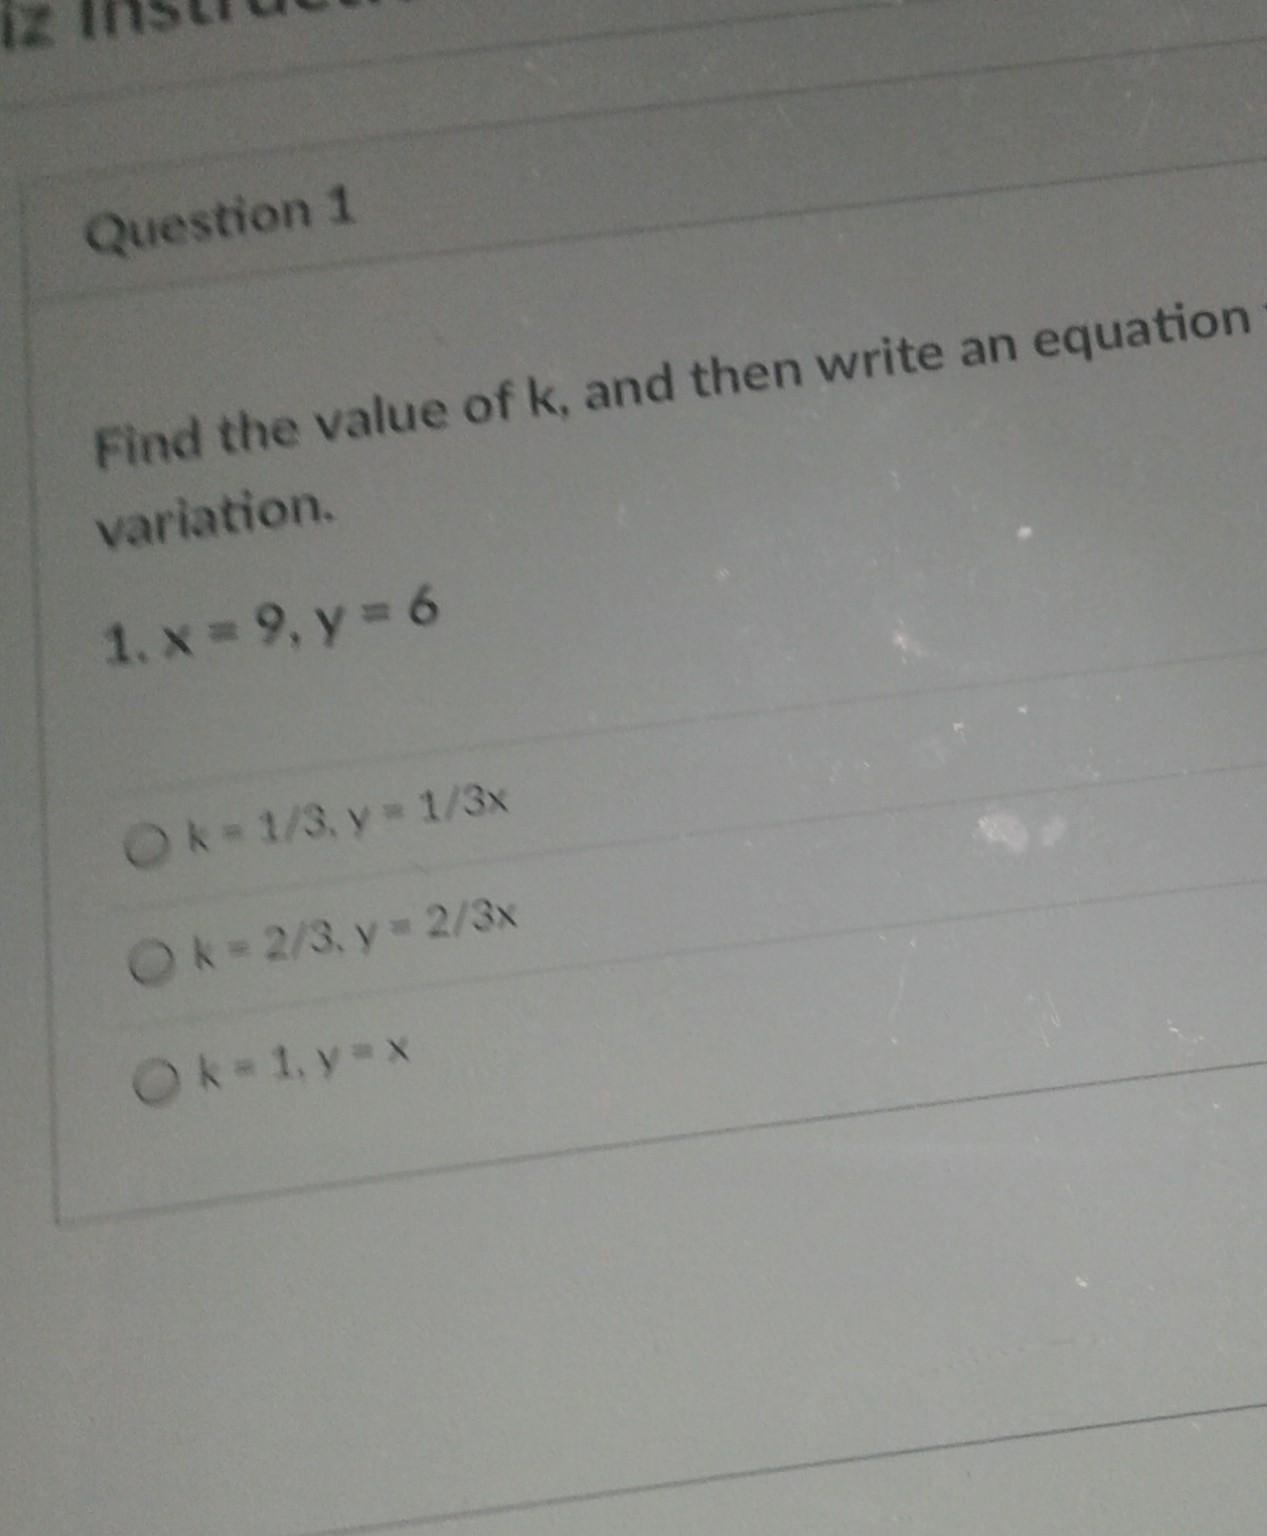 Find The Vbalie If K, And Then Write An Equation To Describee The Direct Variation.